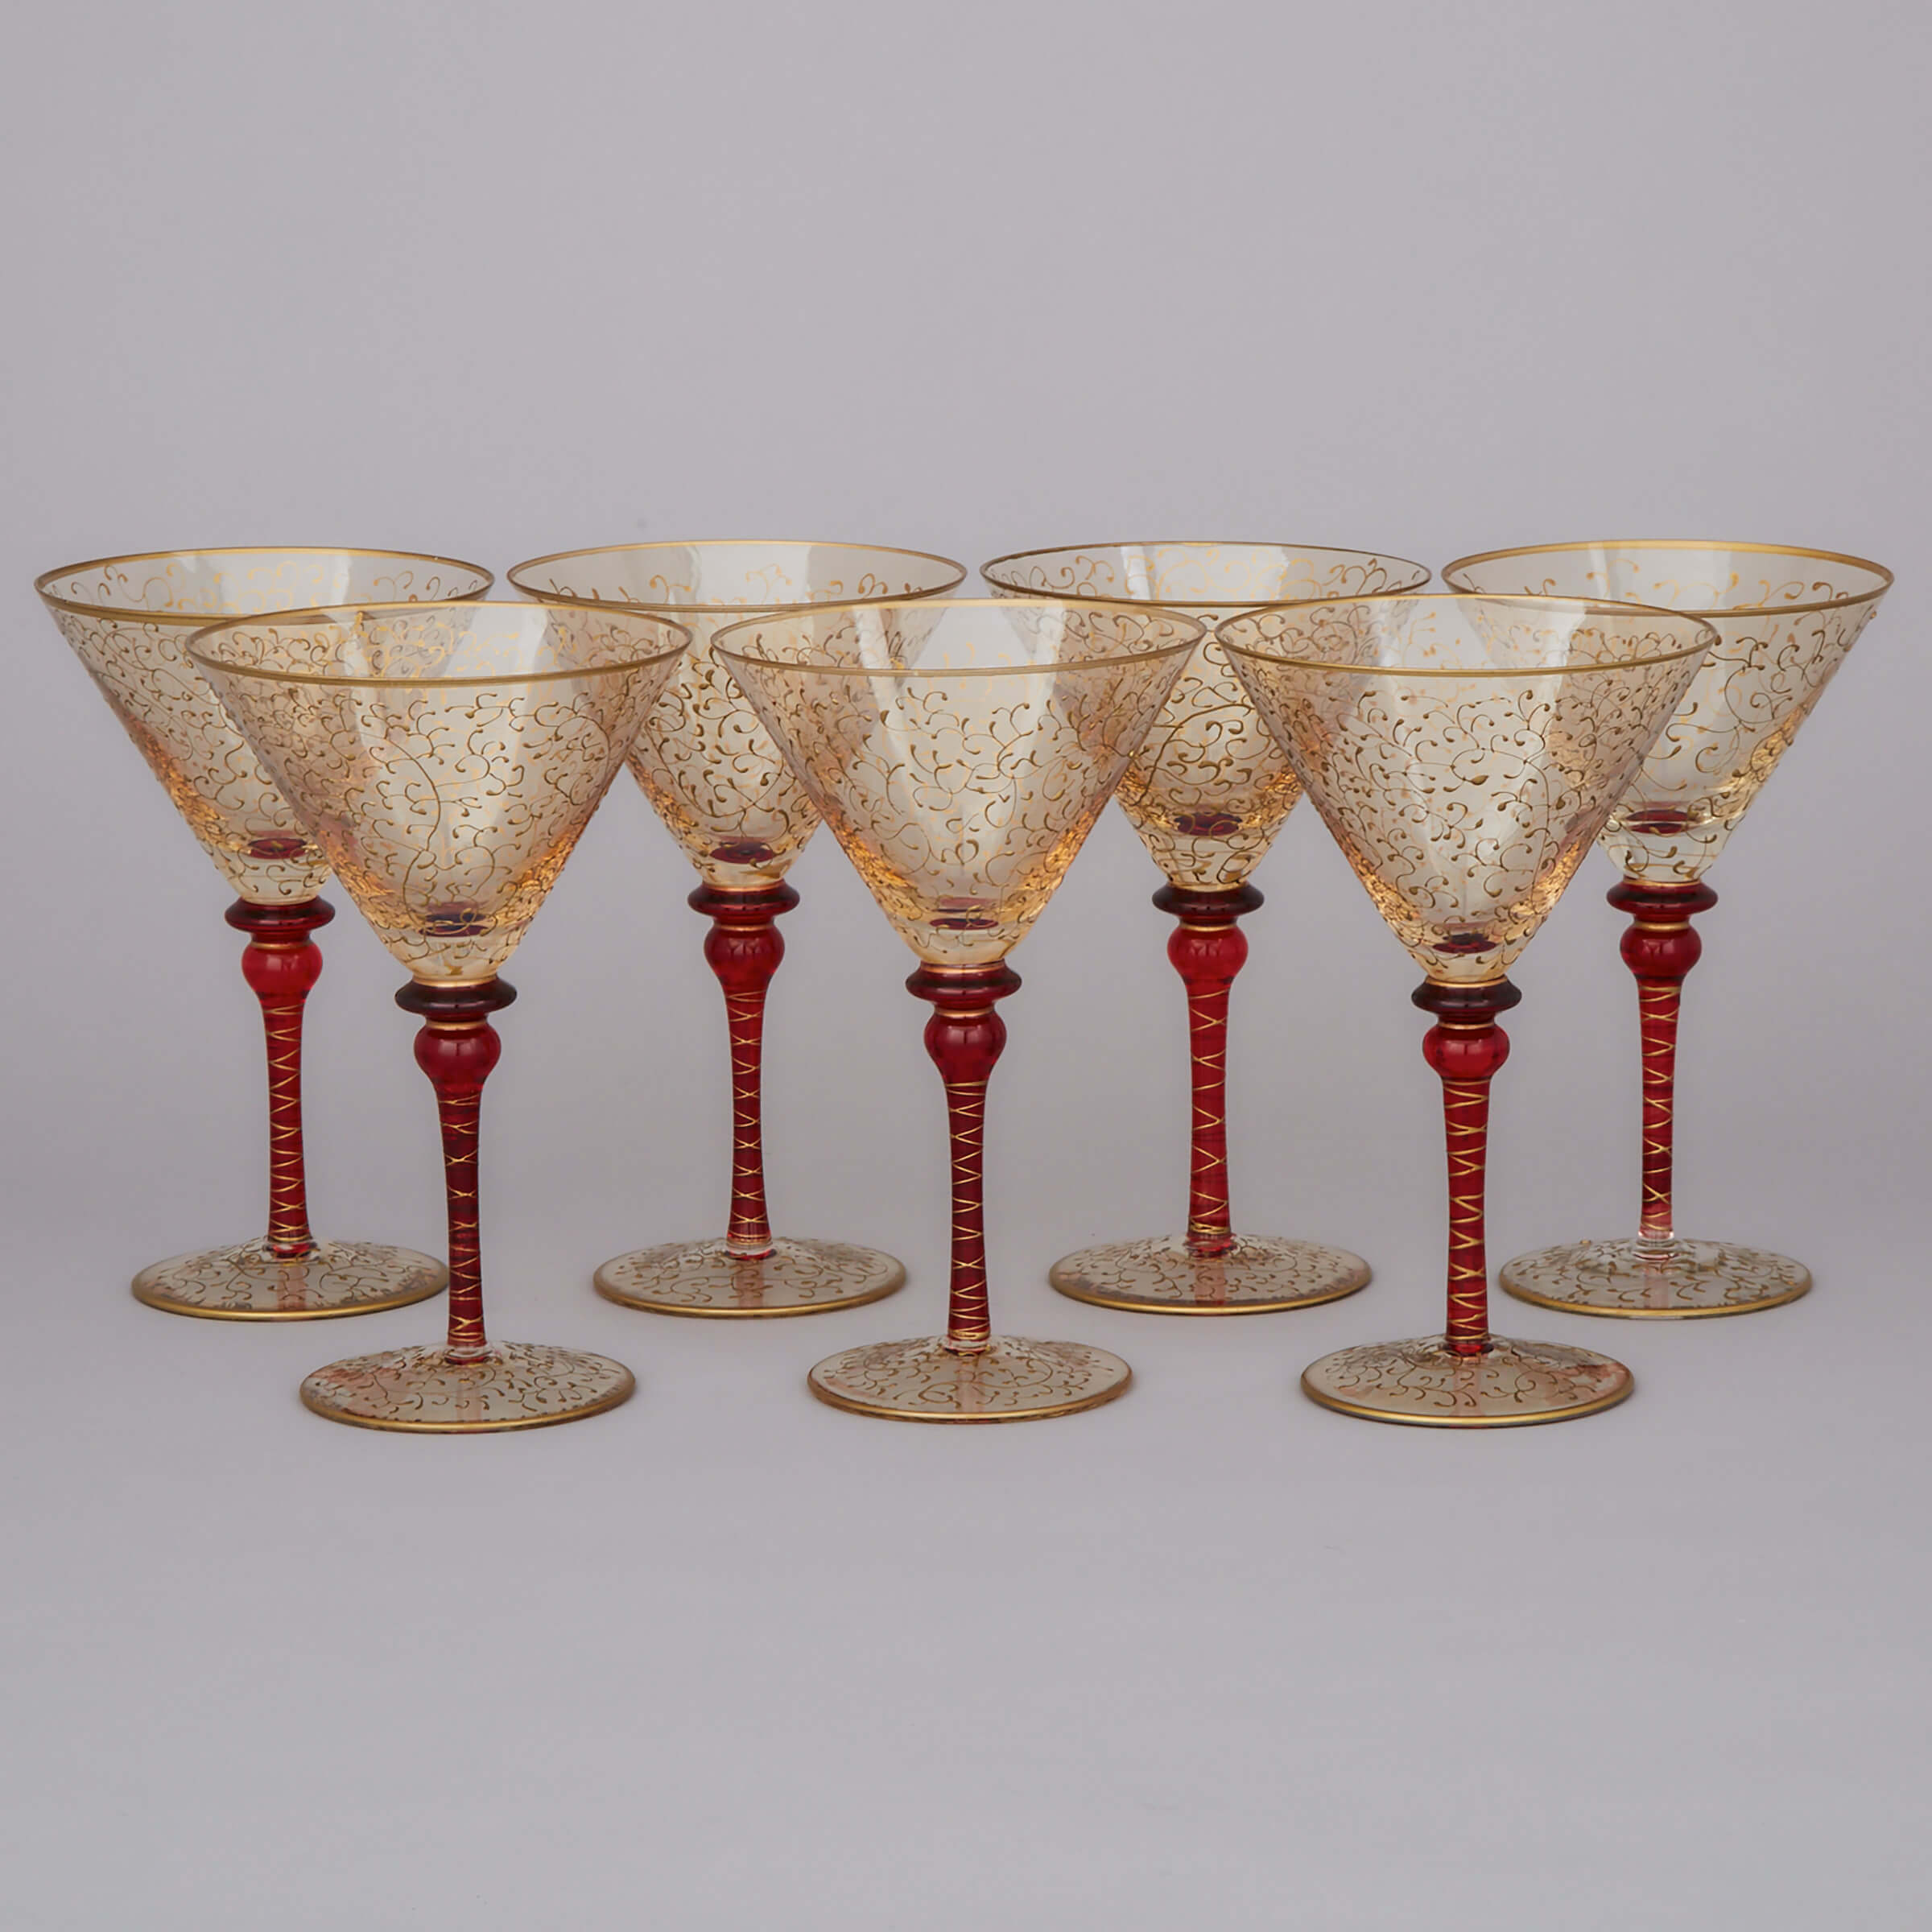 Seven Venetian Red and Gilt Glass Large Martini Glasses, mid-20th century